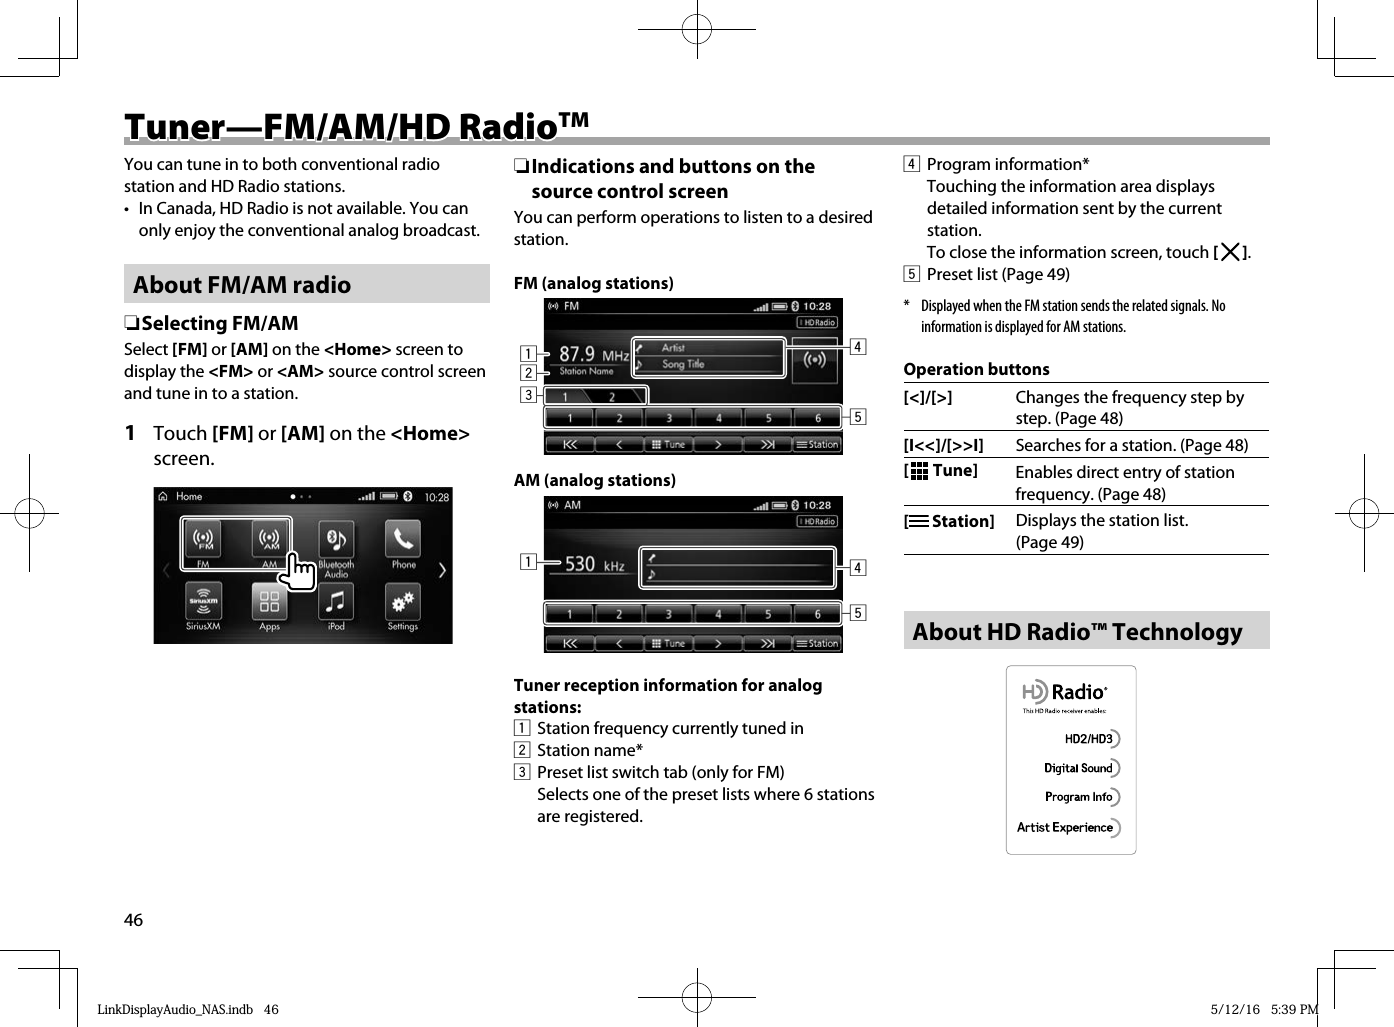 46Tuner—FM/AM/HD RadioTuner—FM/AM/HD RadioTMTMYou can tune in to both conventional radio station and HD Radio stations.•  In Canada, HD Radio is not available. You can only enjoy the conventional analog broadcast.About FM/AM radio ❏ Selecting  FM/AMSelect [FM] or [AM] on the &lt;Home&gt; screen to display the &lt;FM&gt; or &lt;AM&gt; source control screen and tune in to a station.1 Touch [FM] or [AM] on the &lt;Home&gt; screen. ❏Indications and buttons on the source control screenYou can perform operations to listen to a desired station.FM (analog stations)12345AM (analog stations)154Tuner reception information for analog stations:  1   Station frequency currently tuned in2 Station name*3  Preset list switch tab (only for FM)  Selects one of the preset lists where 6 stations are registered.4 Program information*  Touching the information area displays detailed information sent by the current station.To close the information screen, touch [   ].5  Preset list (Page 49)*  Displayed when the FM station sends the related signals. No information is displayed for AM stations.Operation buttons[&lt;]/[&gt;] Changes the frequency step by step. (Page 48)[I&lt;&lt;]/[&gt;&gt;I] Searches for a station. (Page 48) [  Tune] Enables direct entry of station frequency. (Page 48) [  Station] Displays the station list. (Page 49) About HD Radio™ TechnologyLinkDisplayAudio_NAS.indb   46LinkDisplayAudio_NAS.indb   46 5/12/16   5:39 PM5/12/16   5:39 PM